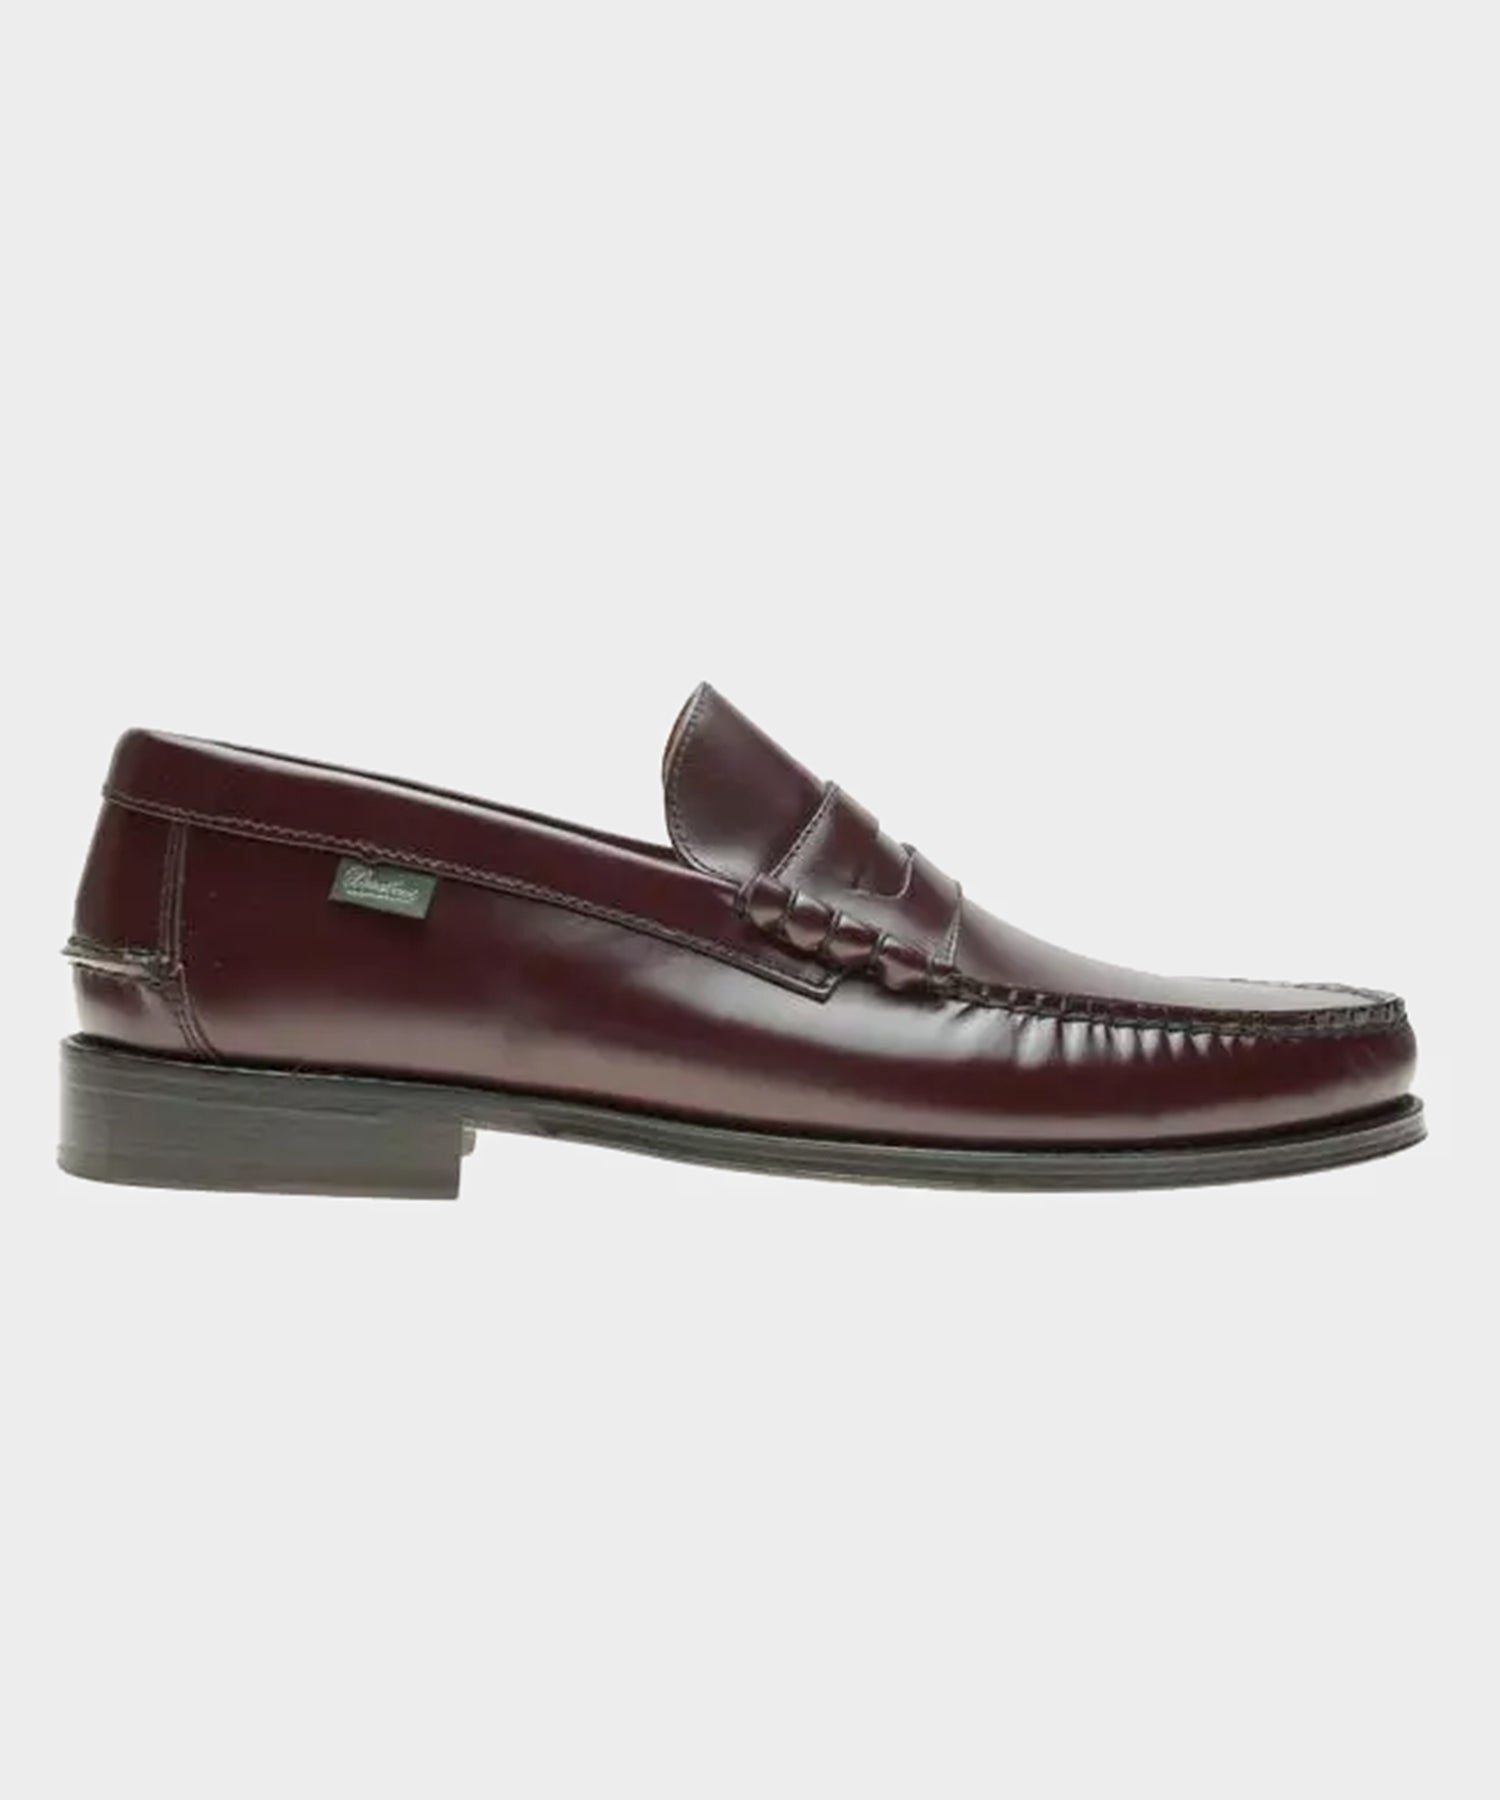 Paraboot Columbia Loafer in Merisier